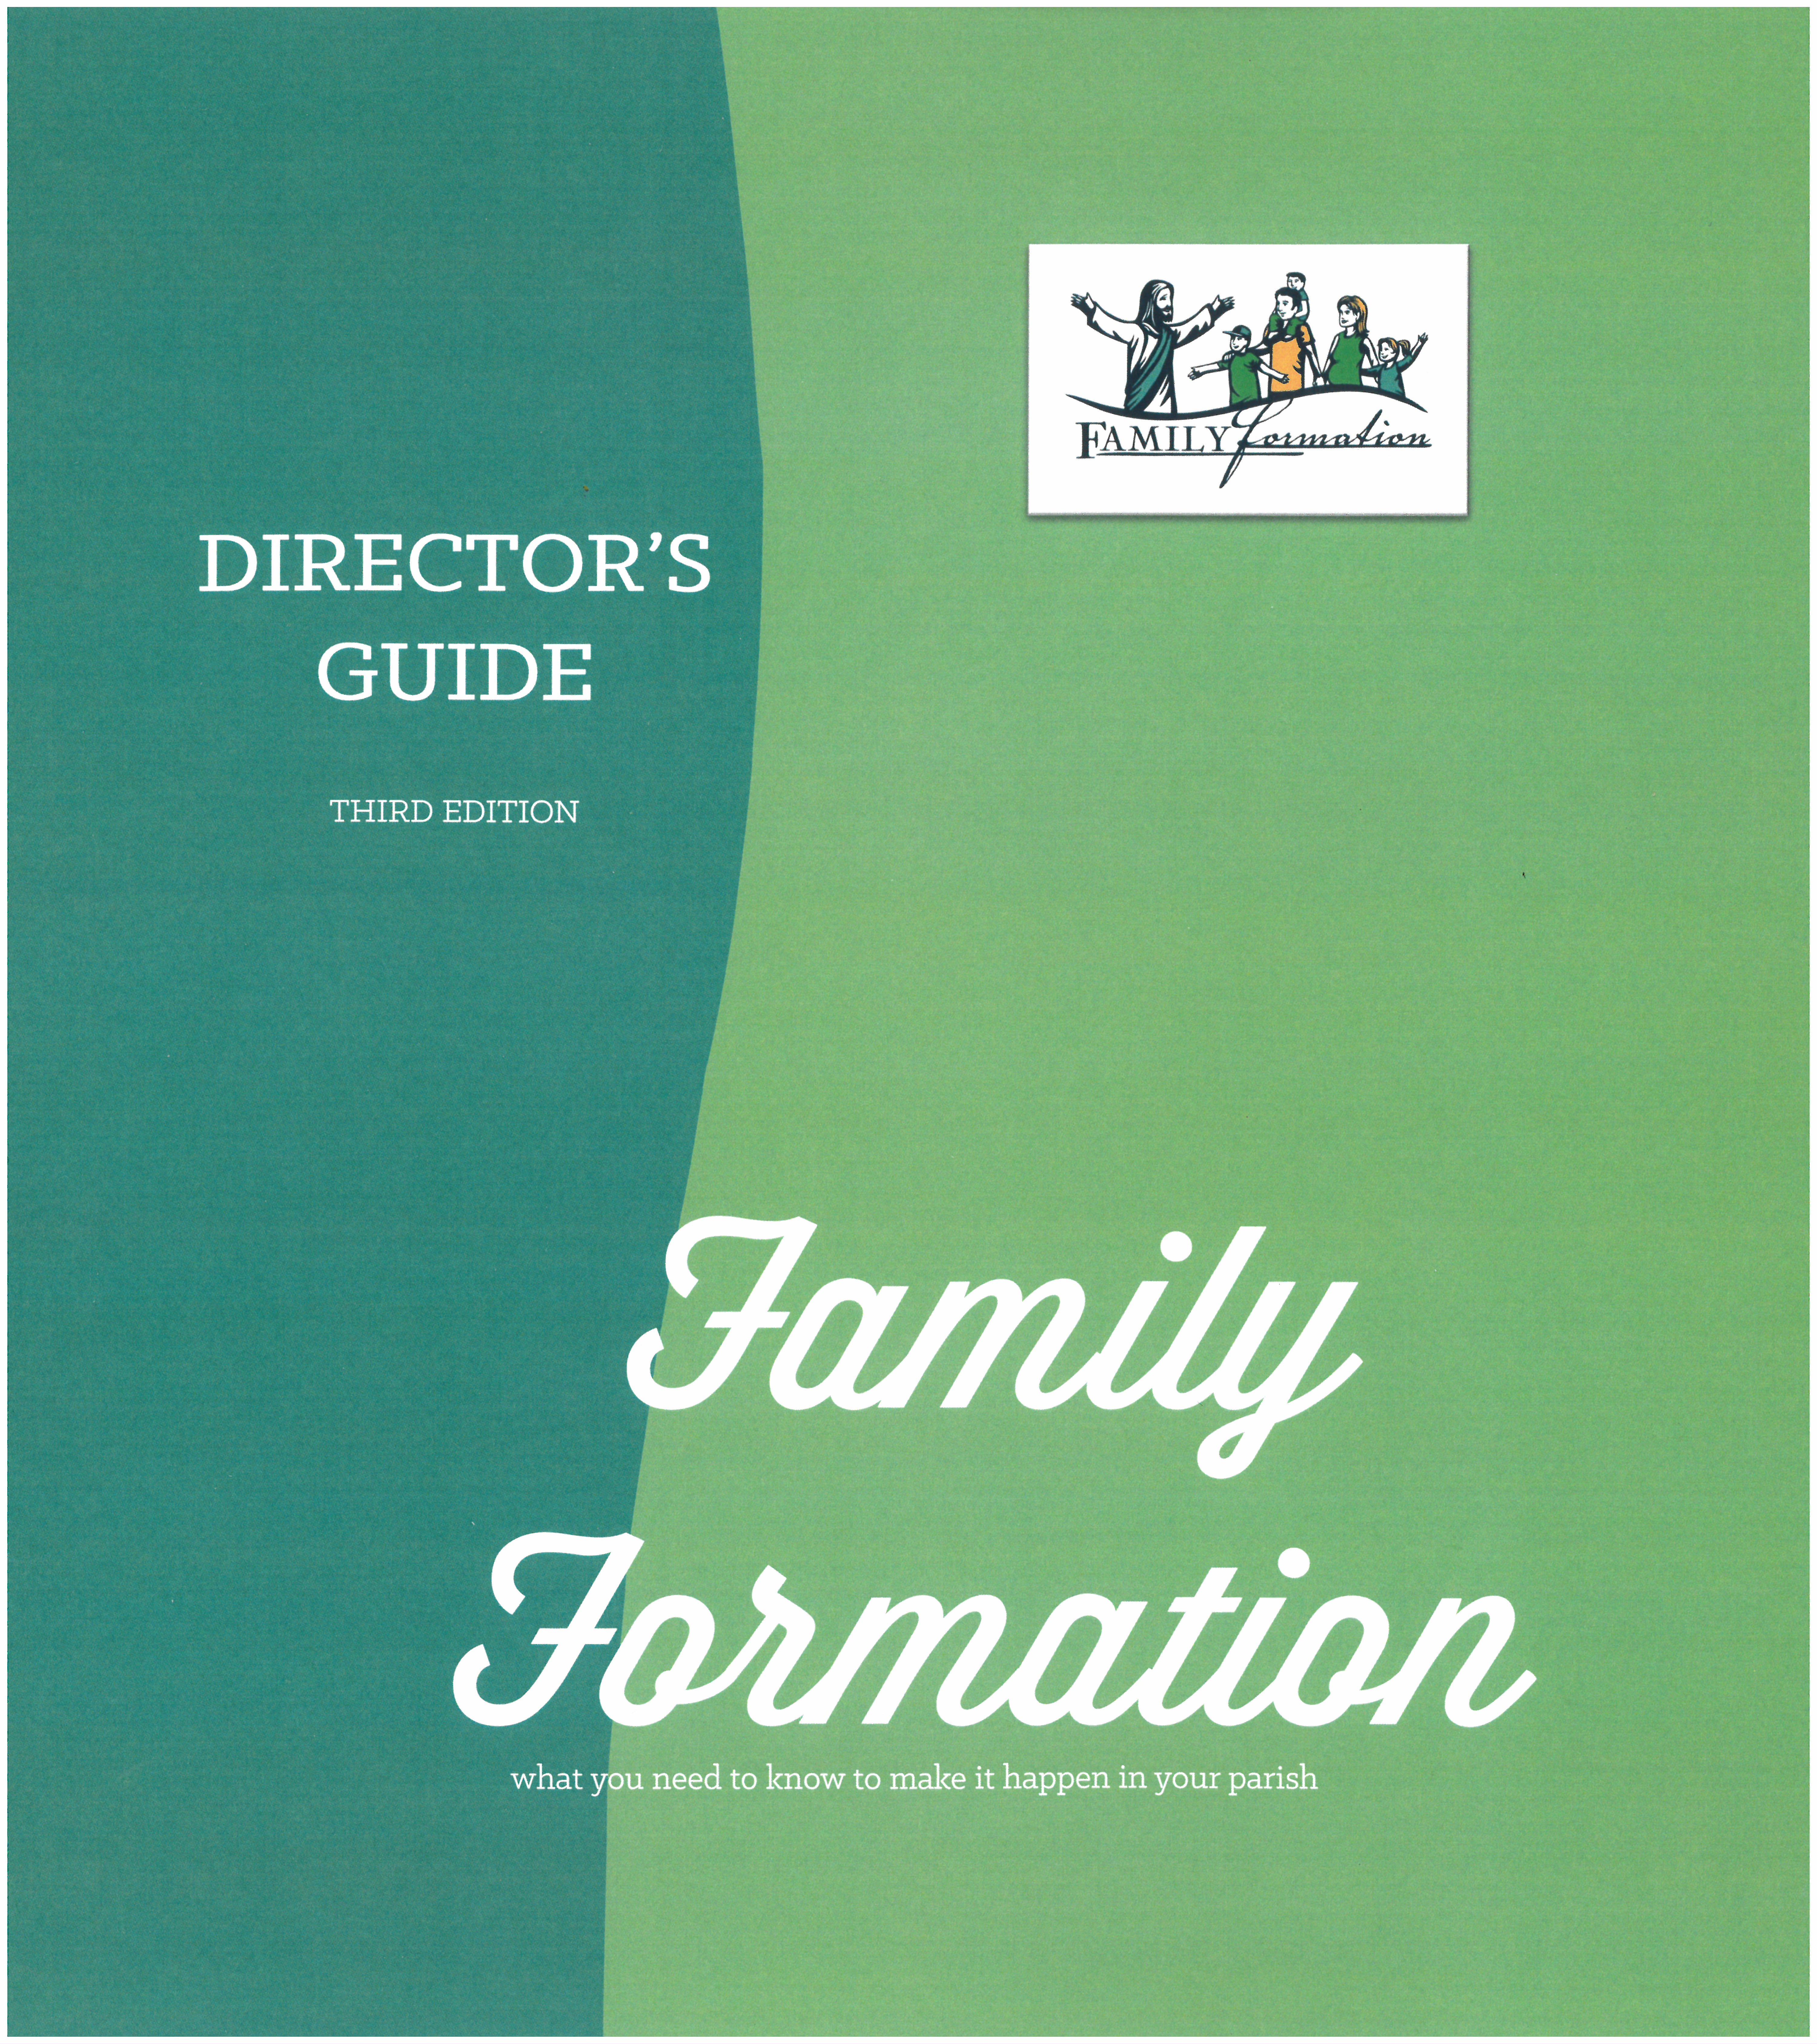 Family Formation Director's Guide